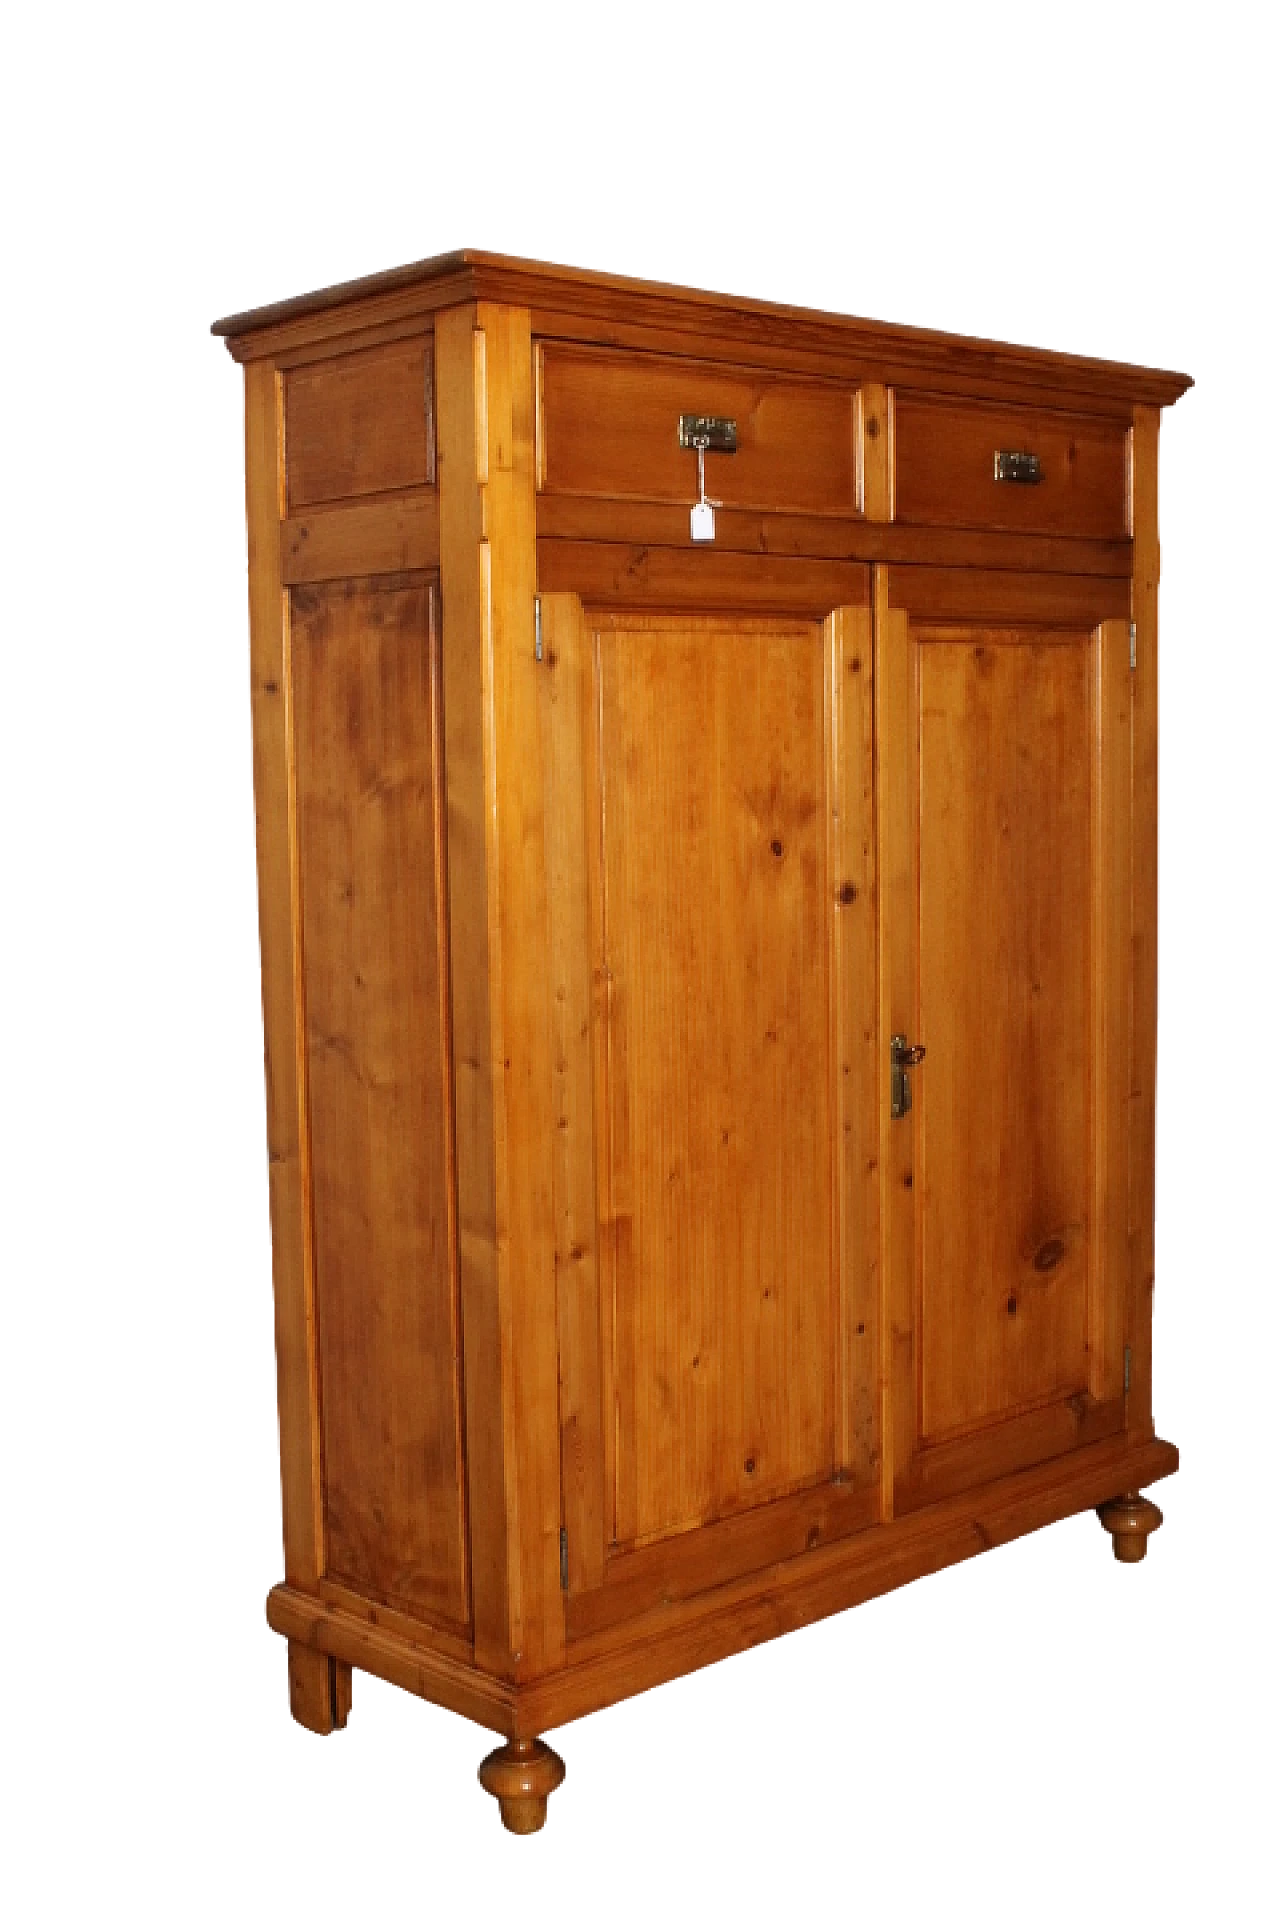 Wooden cupboard with drawers & hinged doors, 19th century 18